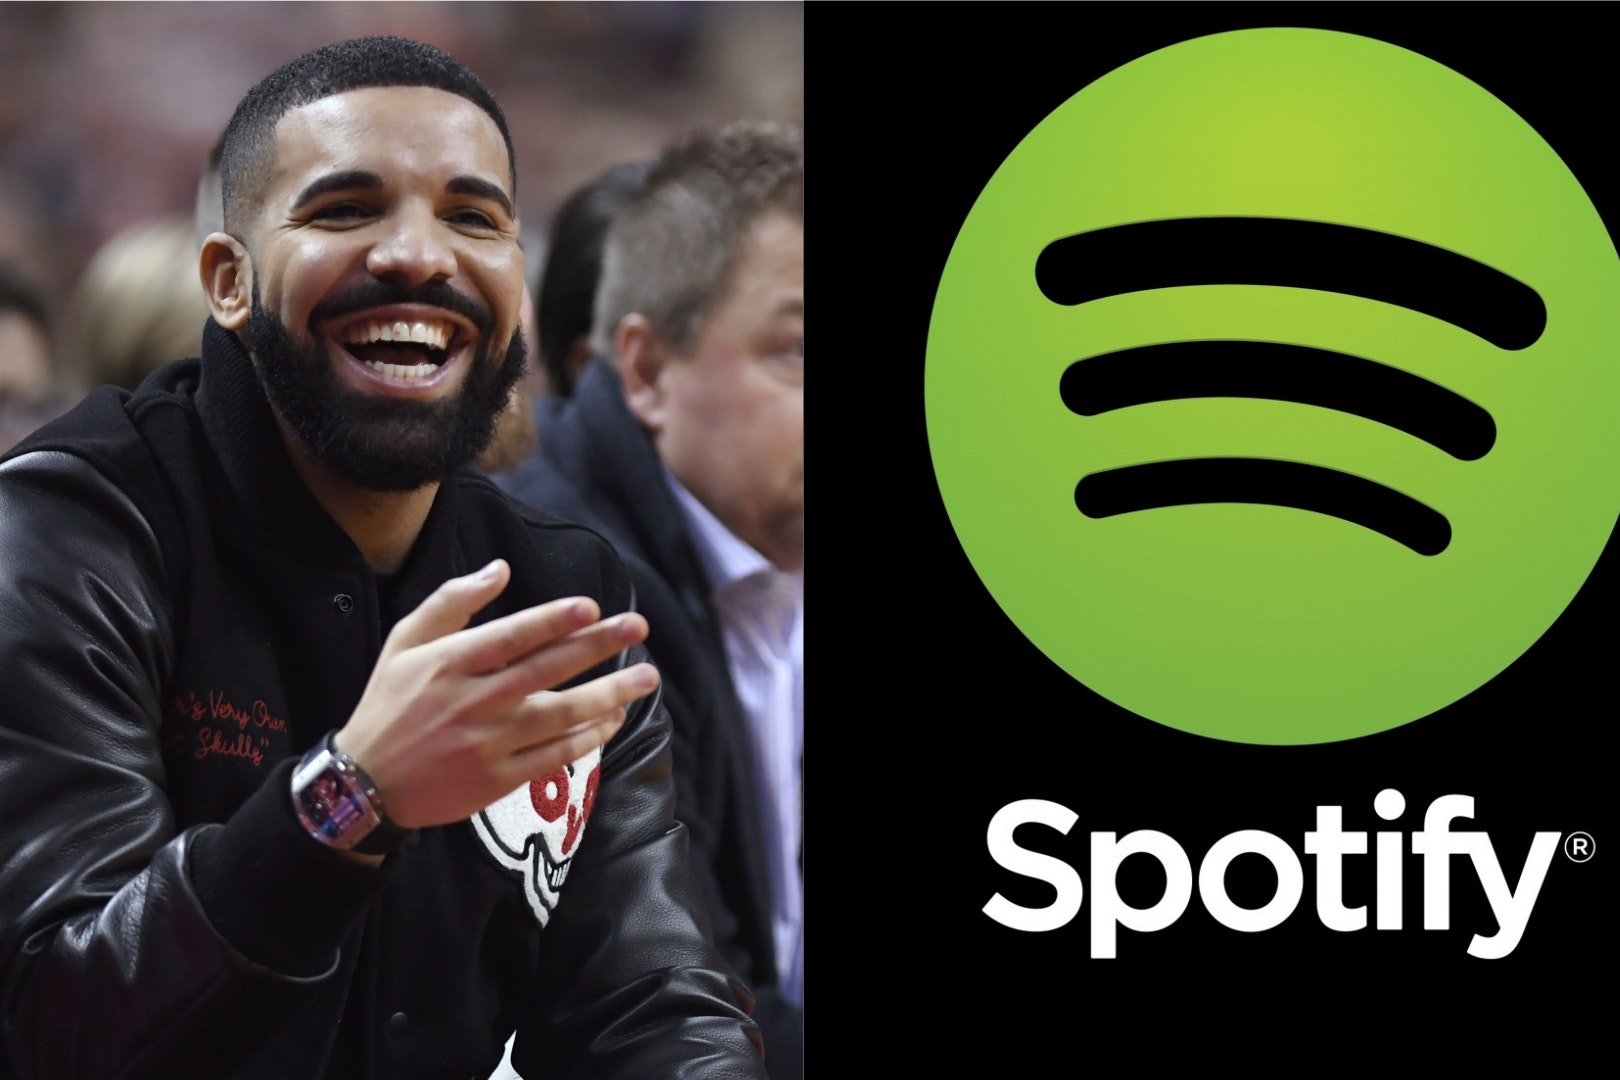 Spotify Wrapped lets users review what they listened to in 2018